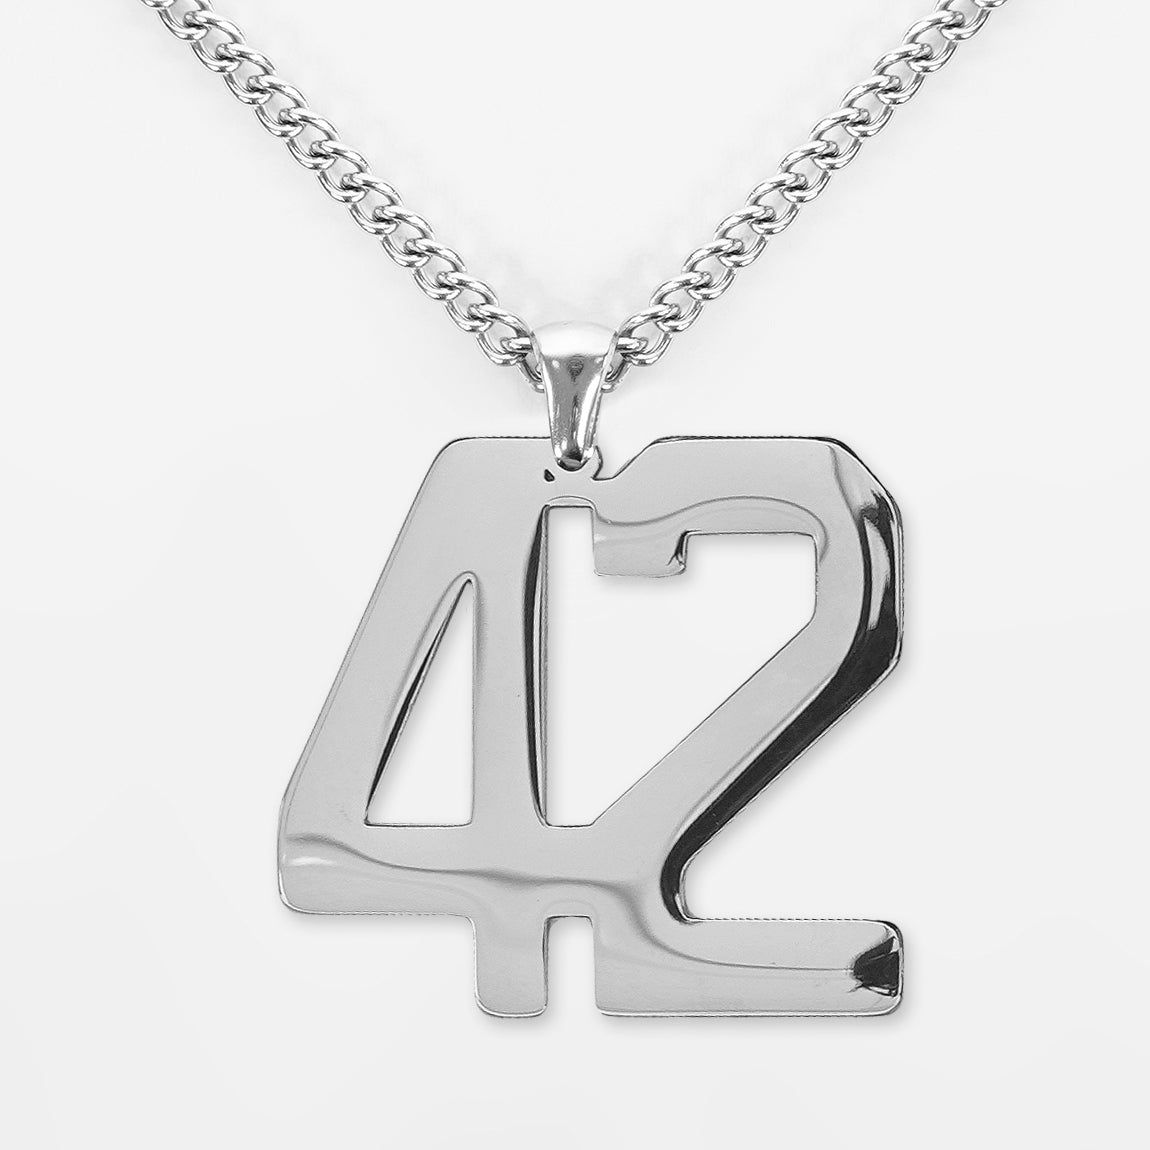 42 Number Pendant with Chain Necklace - Stainless Steel